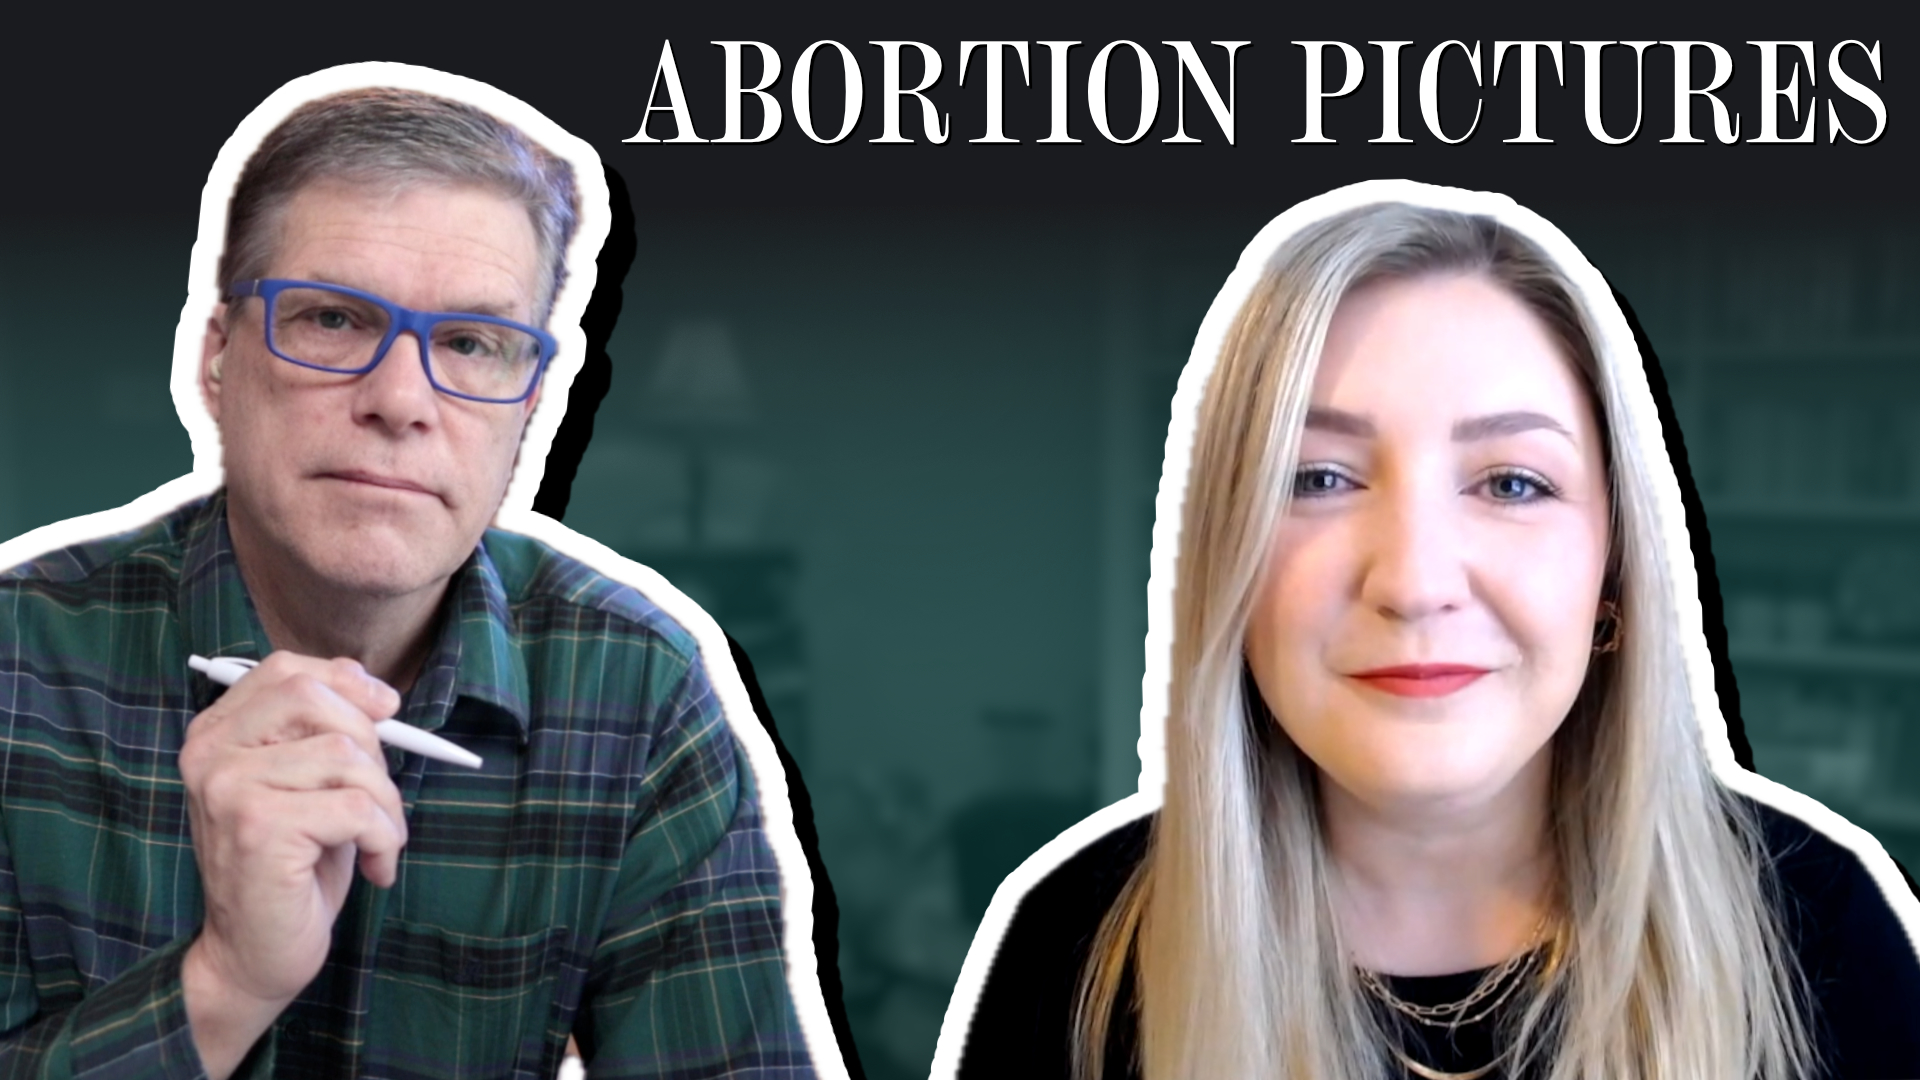 Using abortion pictures in the real world